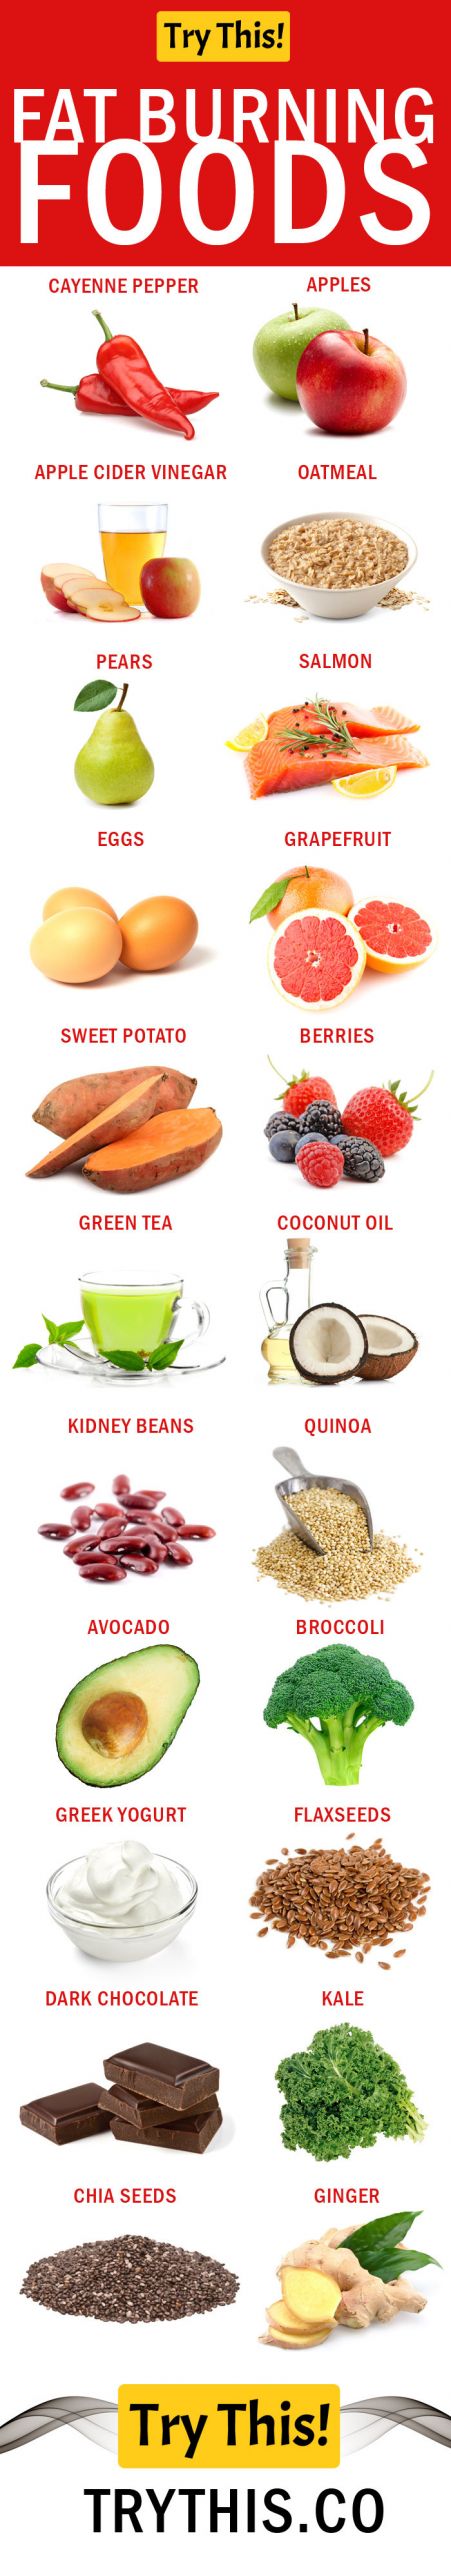 Healthy Fat Burning Foods
 Fat Burning Foods – Best Foods To Eat For Weight Loss